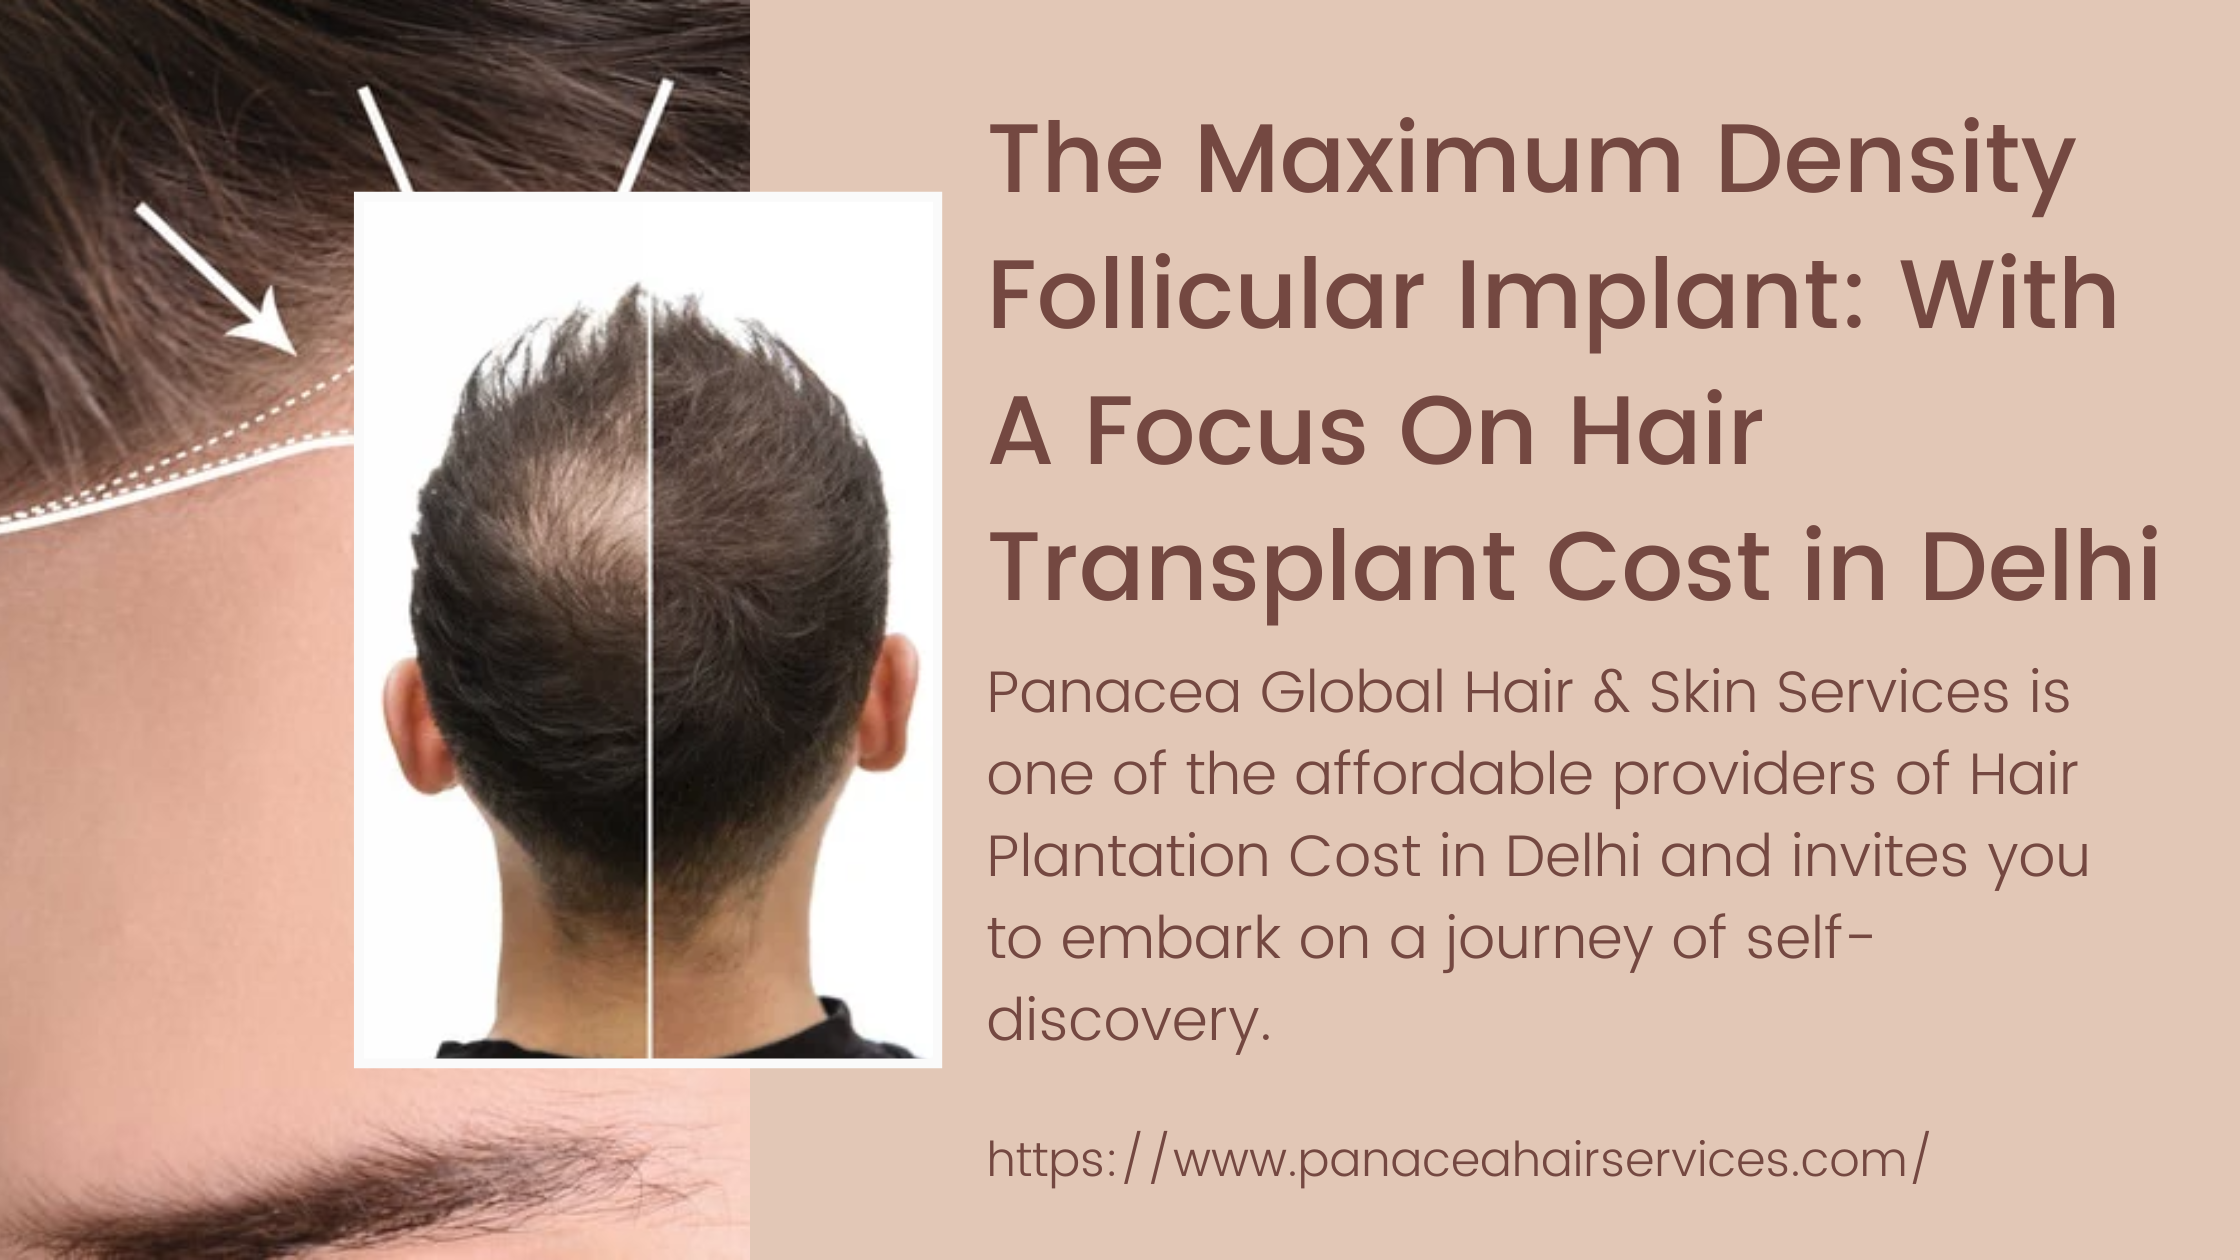 The Maximum Density Follicular Implant With A Focus On Hair Transplant Cost in Delhi